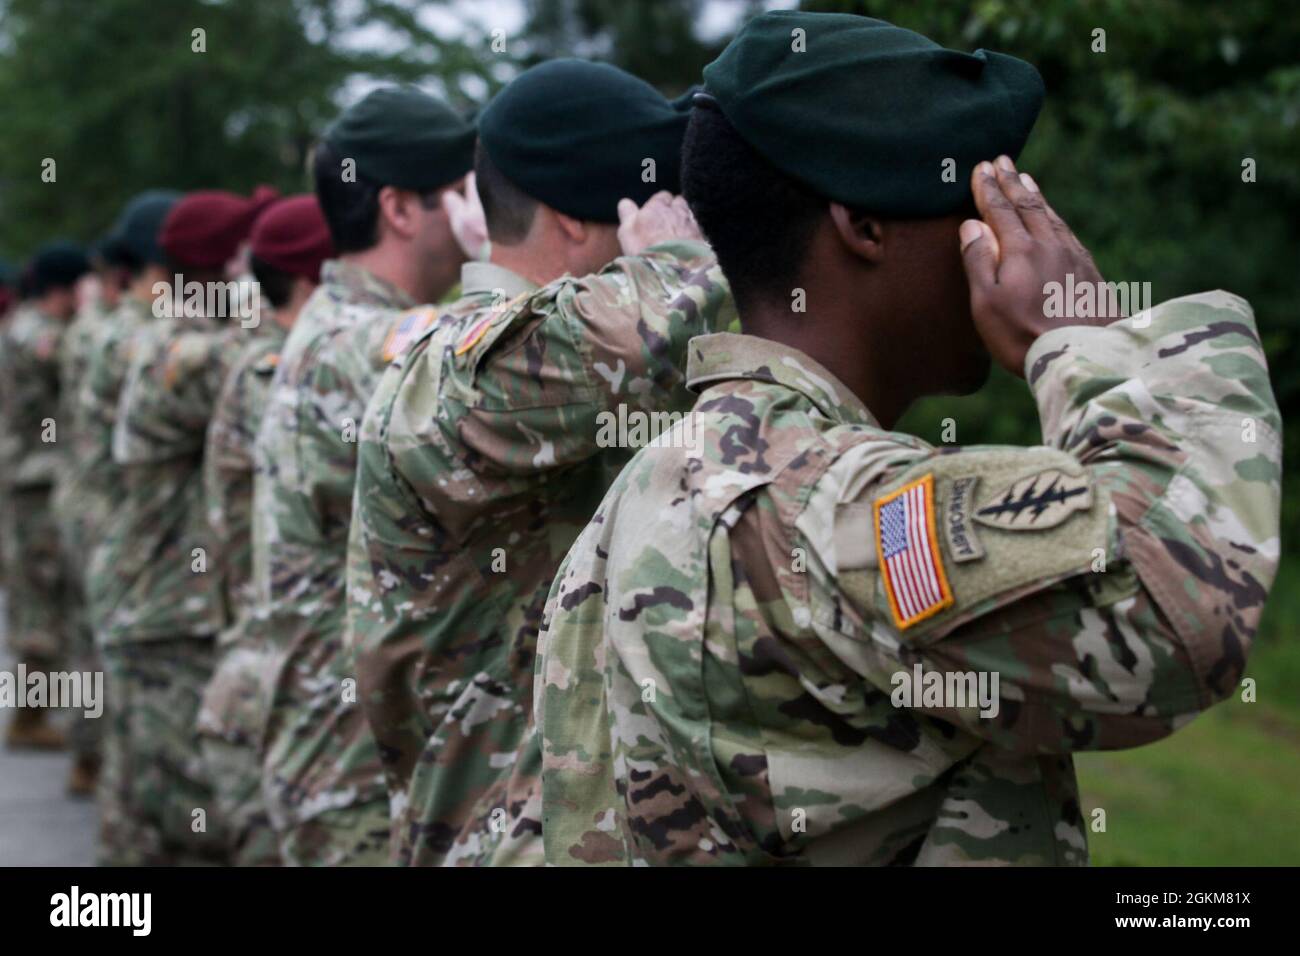 Green Berets and Soldiers assigned to 3rd Special Forces Group (Airborne) salute fallen Soldiers during the 3rd SFG (A) memorial walk ceremony at Fort Bragg, NC, May 25, 2021. Gold star family members, friends and fellow Soldiers gathered today in remembrance of Soldiers who have died while deployed and honored their memory by placing a single rose on top of their memorial stone. Stock Photo